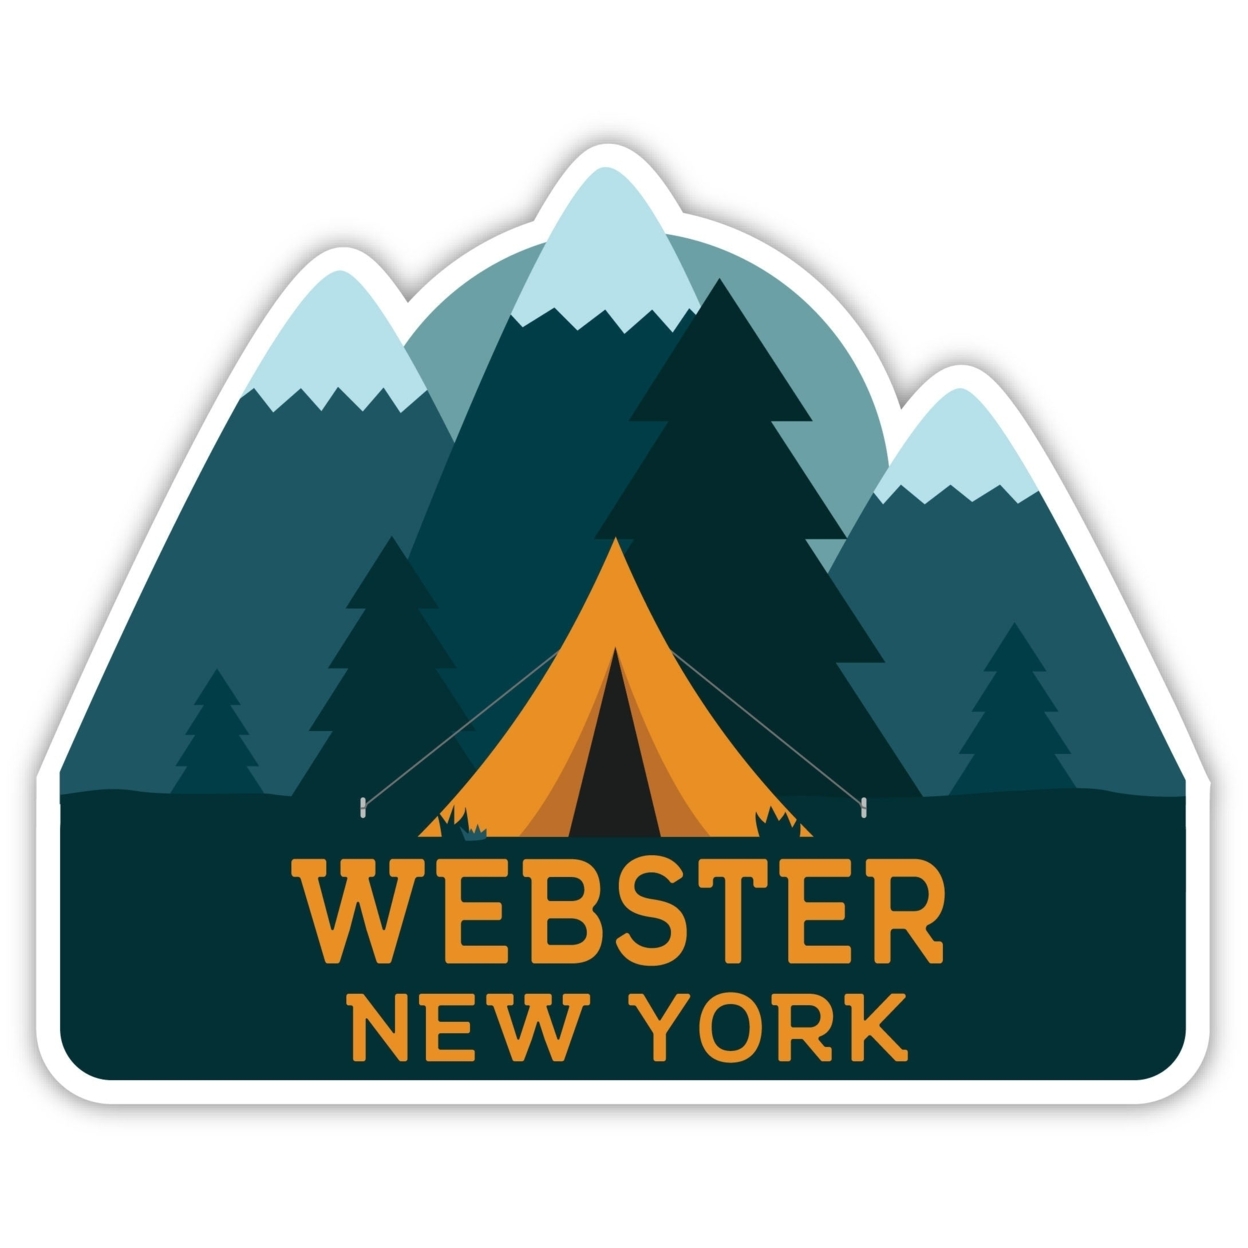 Webster New York Souvenir Decorative Stickers (Choose Theme And Size) - Single Unit, 4-Inch, Tent